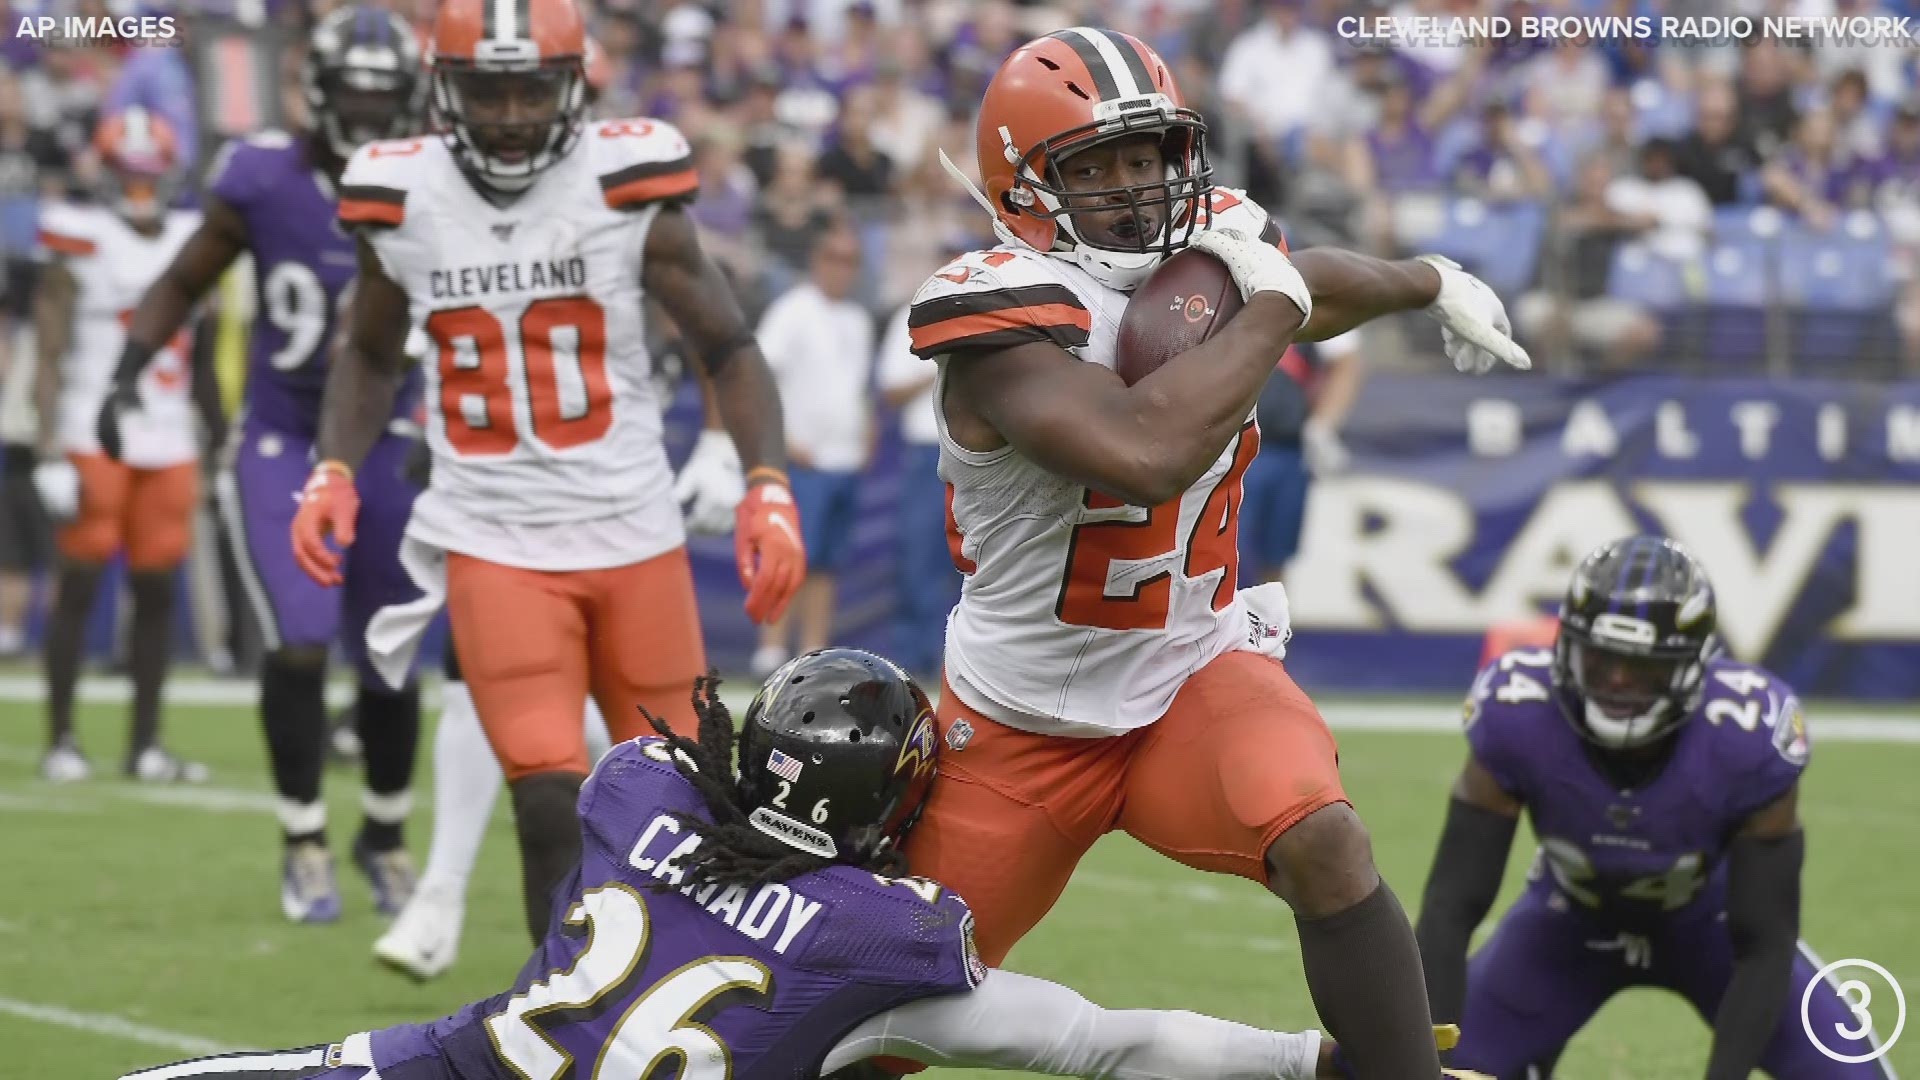 What a day!  Nick Chubb gave the Cleveland Browns a 17-10 lead over the Baltimore Ravens with a 14-yard third quarter touchdown run.